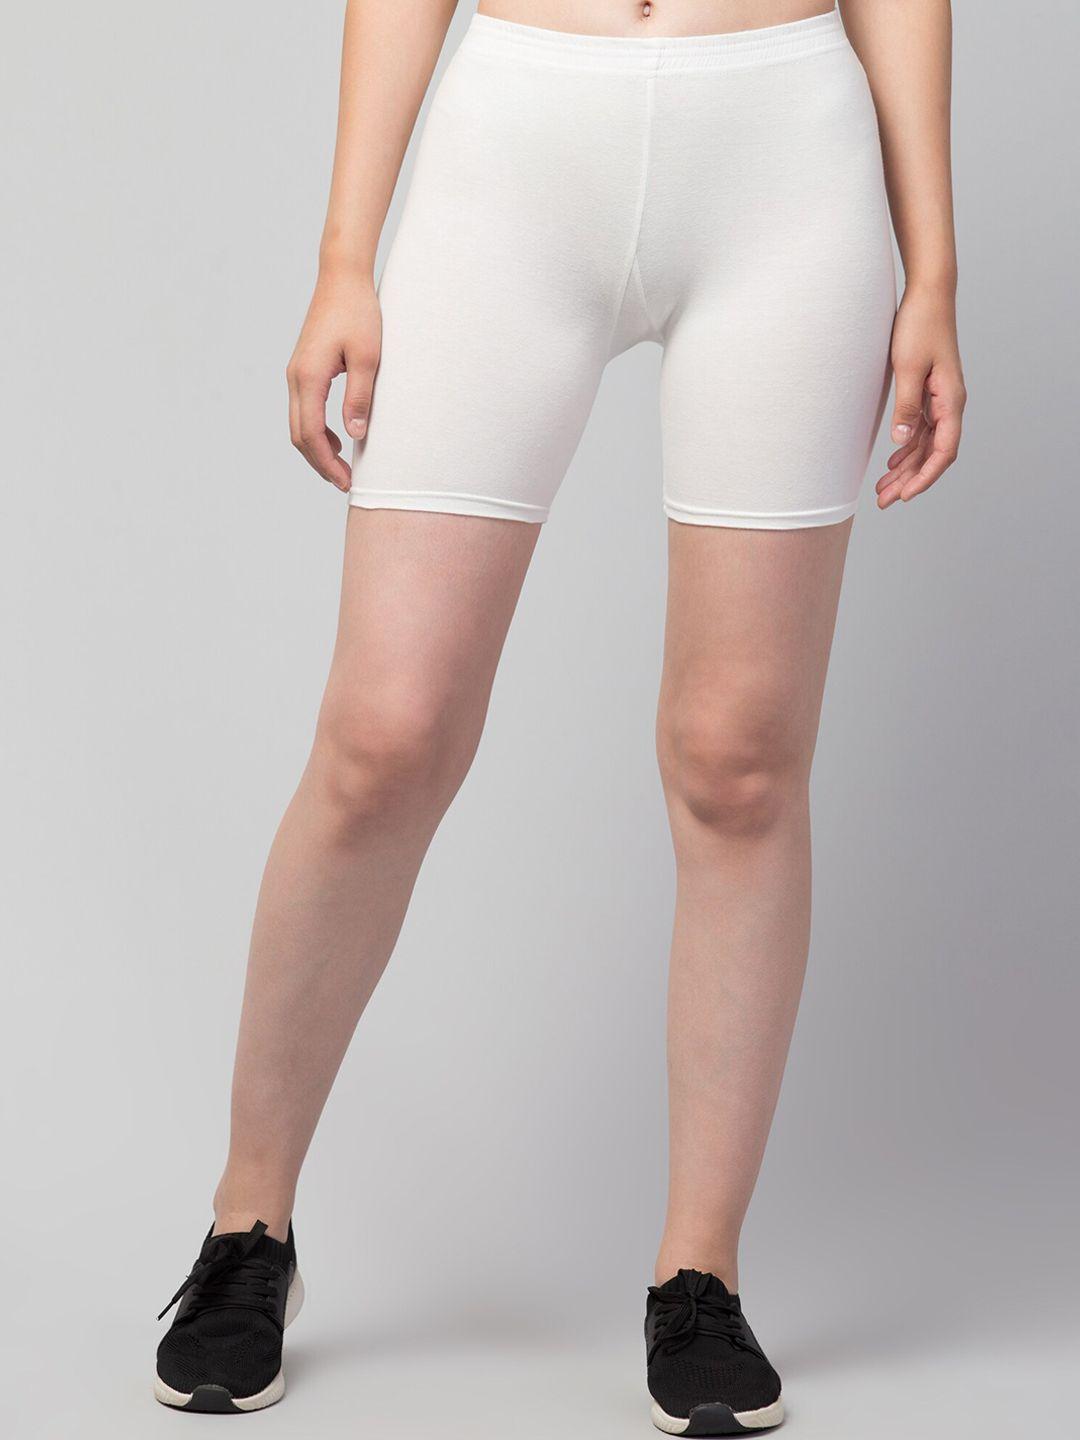 apraa & parma women white solid cotton skinny fit cycling sports shorts